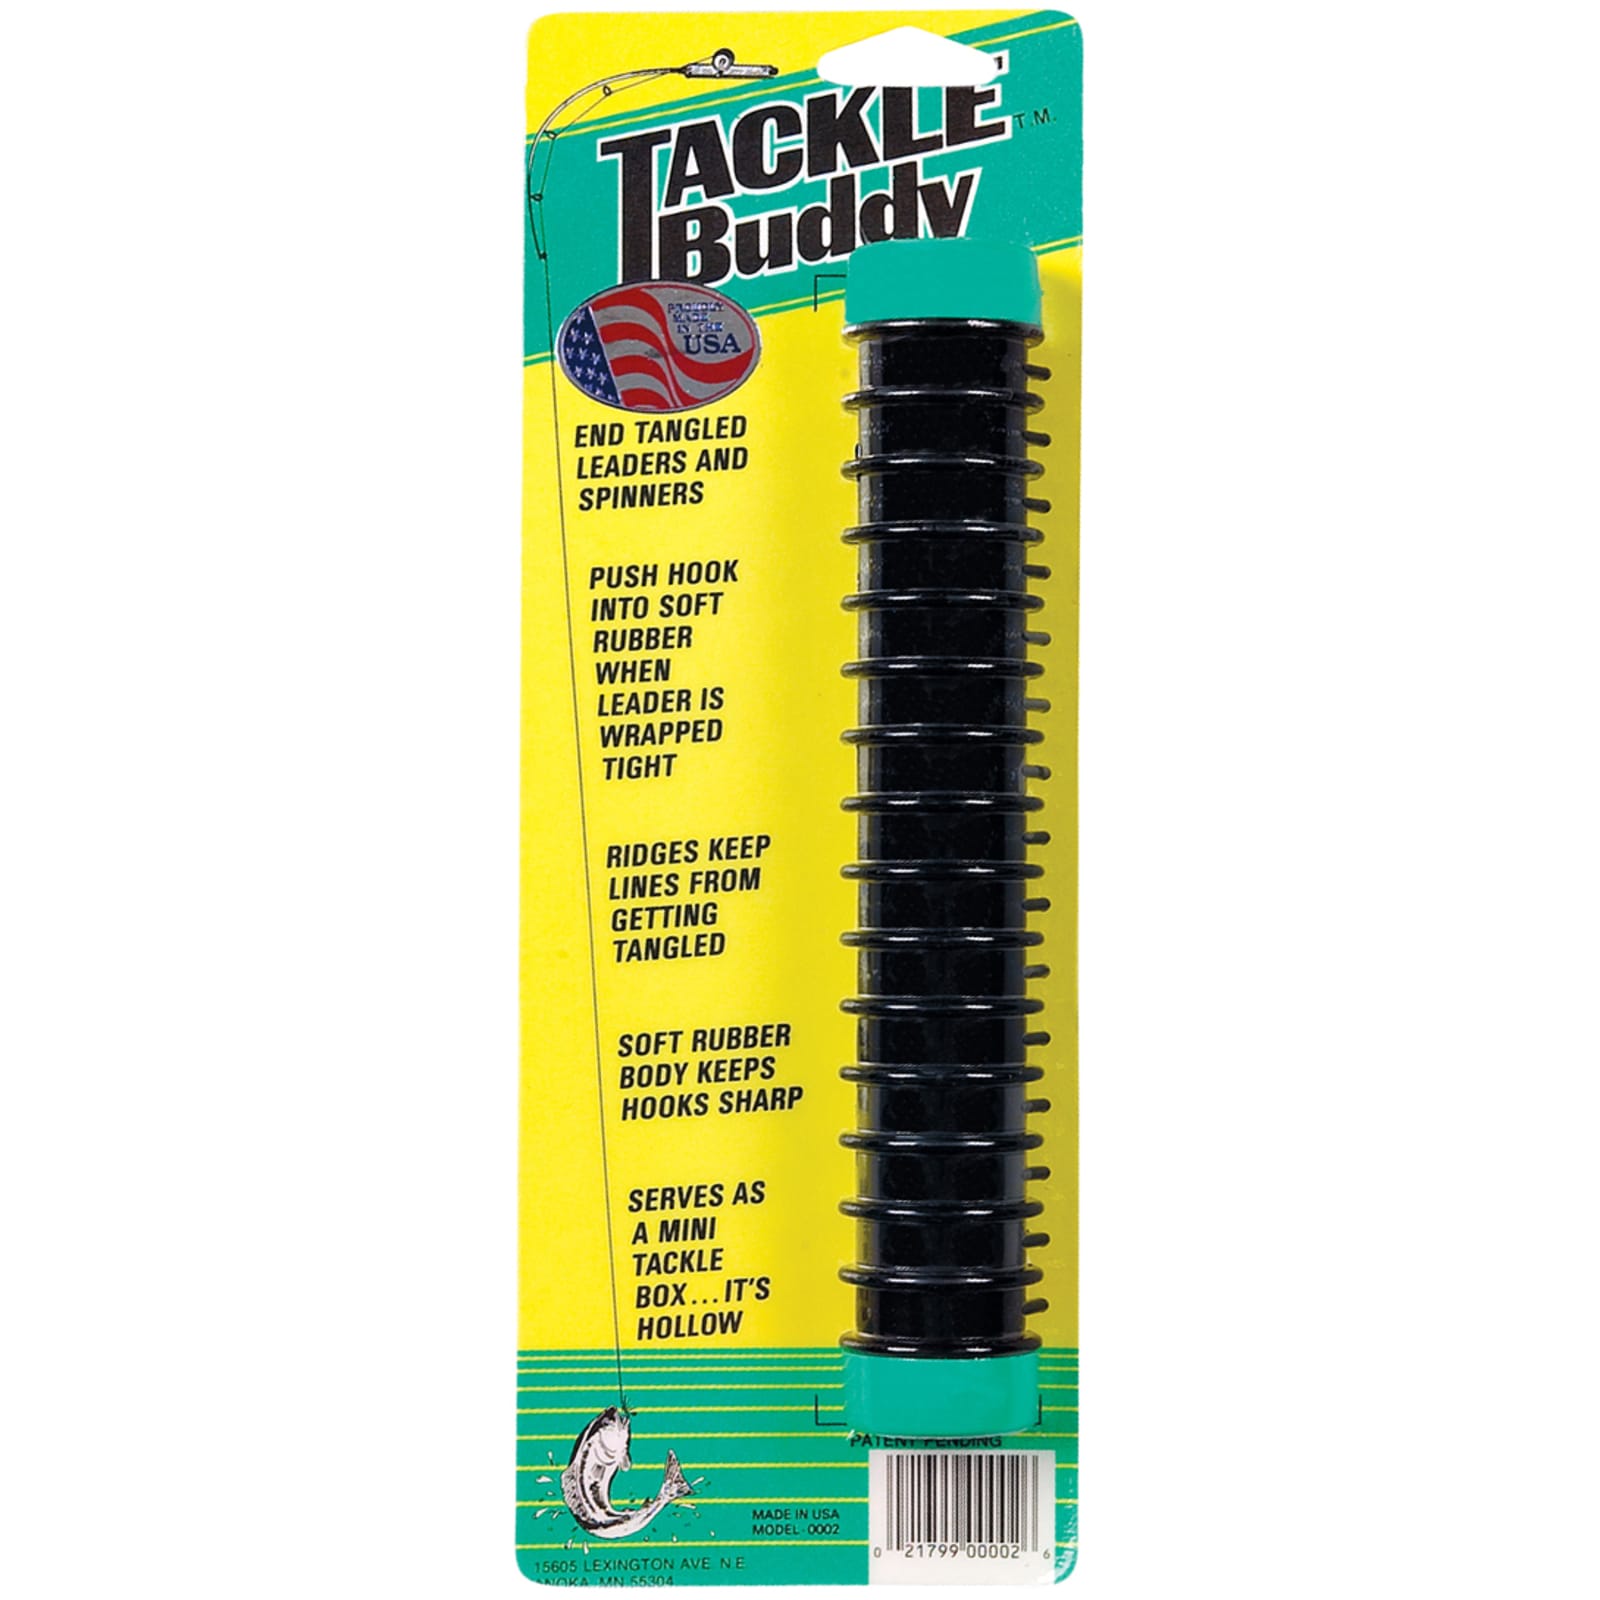 Leader Holder - 1-1/2 In. x 8-1/2 In. by Tackle Buddy at Fleet Farm